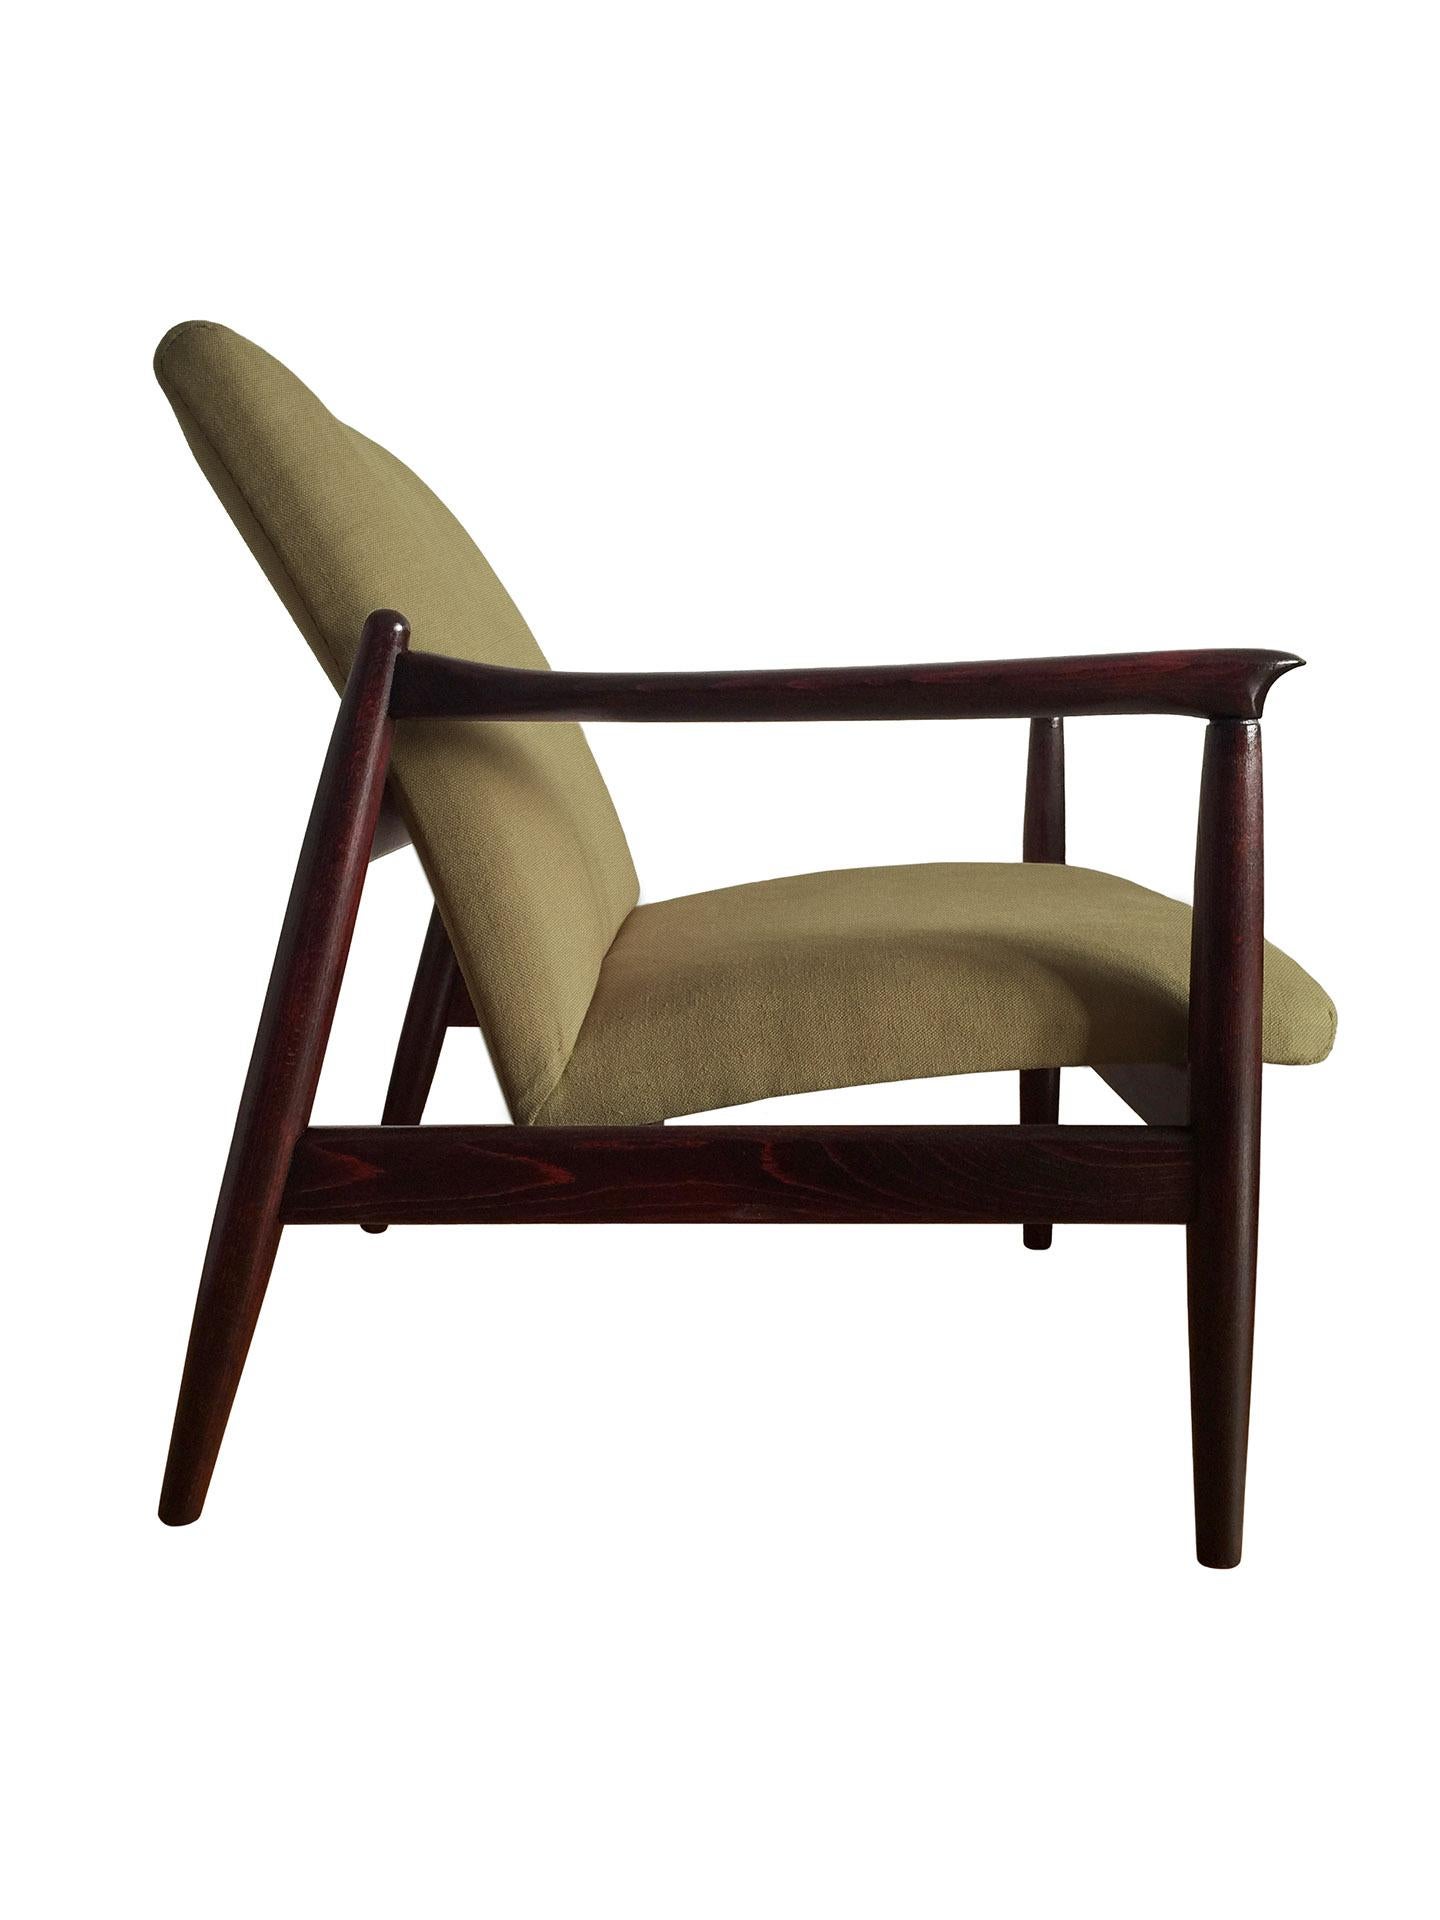 One of the icon of Polish midcentury design, model GFM-64 armchair, designed by Edmund Homa, has been manufactured by Goscinska Furniture factory in Poland in the 1960s. The structure is made of solid beechwood in a warm palisander color, finished